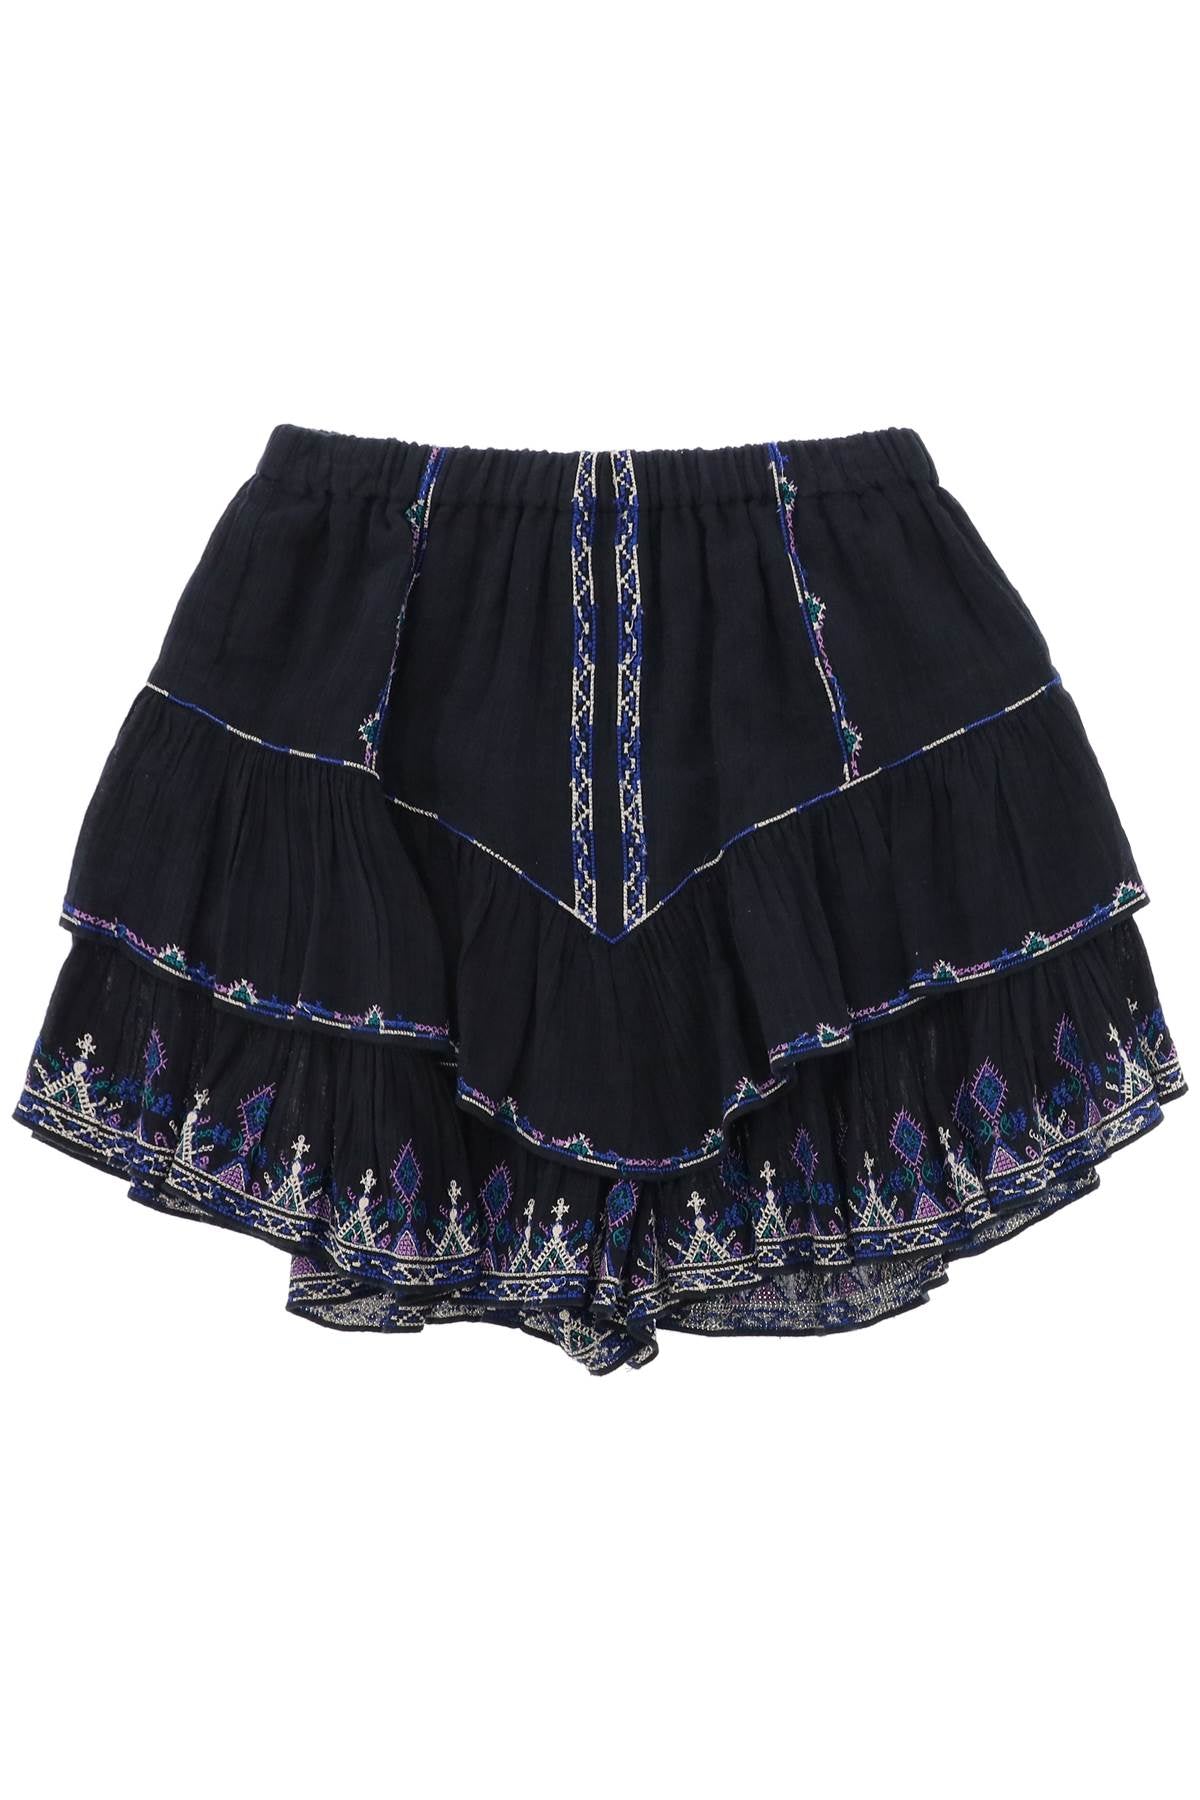 "jocadia shorts with embroidery and-0